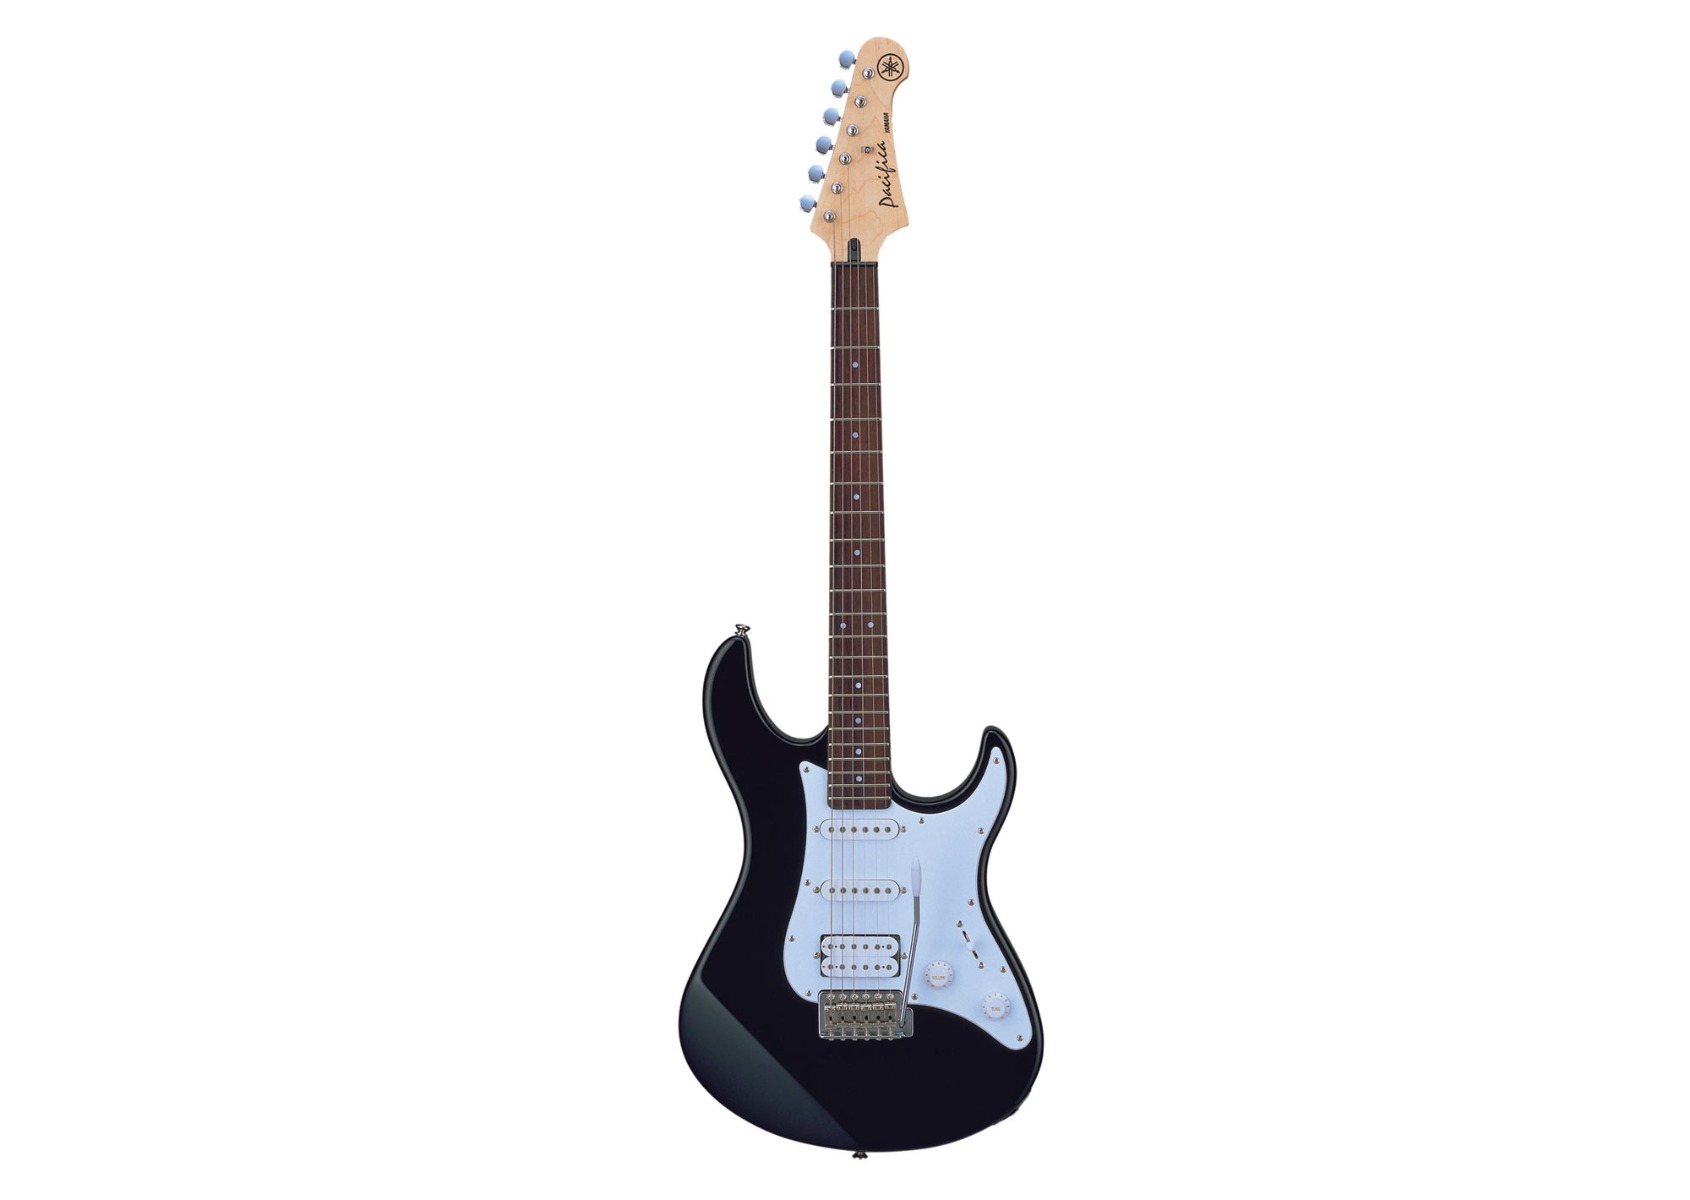 PAC012 Pacifica Electric Guitar